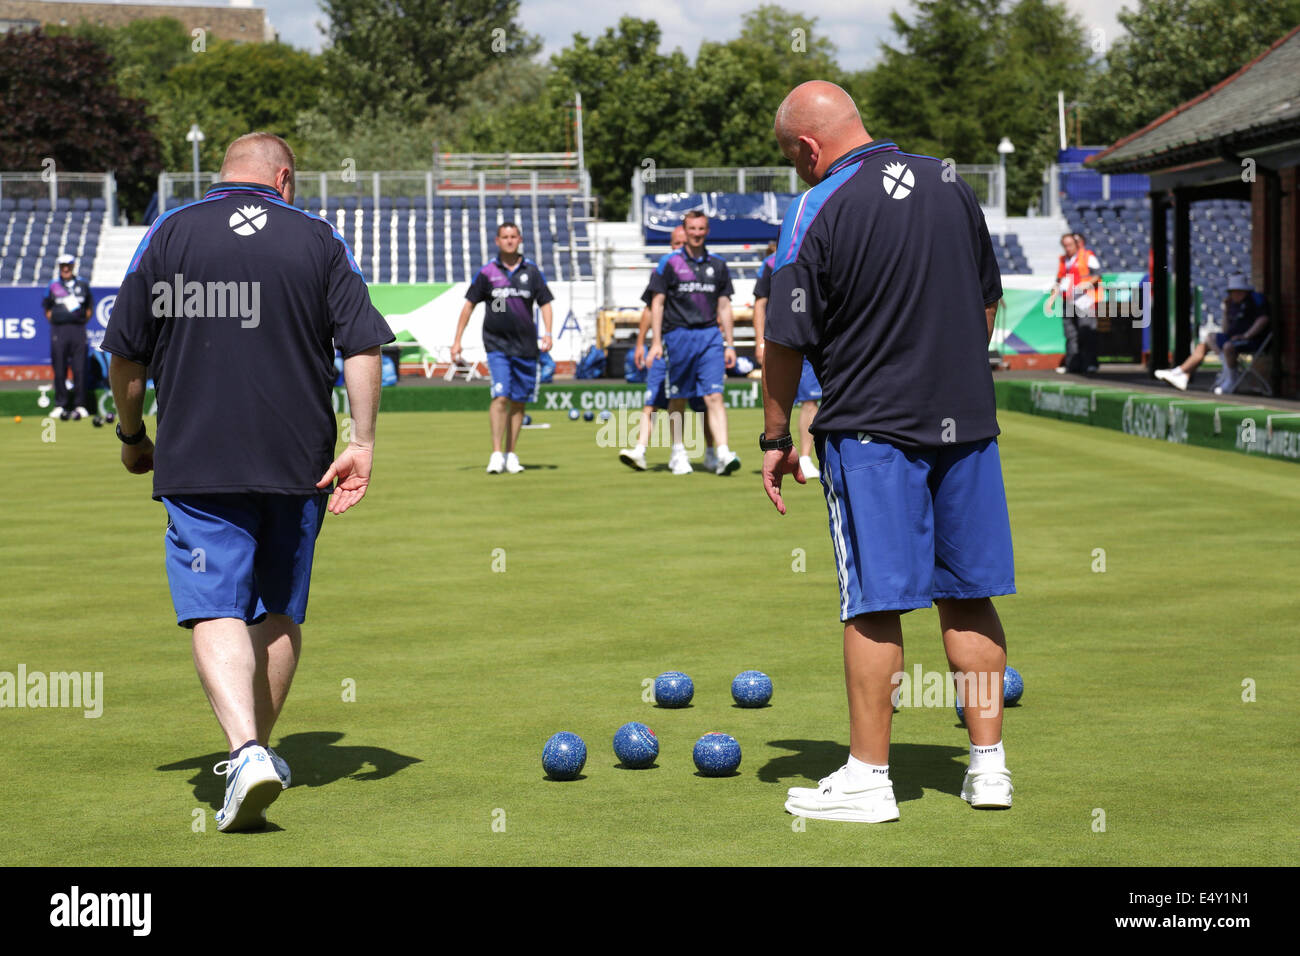 Kelvingrove Lawn Bowls Centre, Glasgow, Scotland, UK, Thursday, 17th July, 2014. Team Scotland training in the venue for the 2014 Commonwealth Games Lawn Bowls Competition Stock Photo